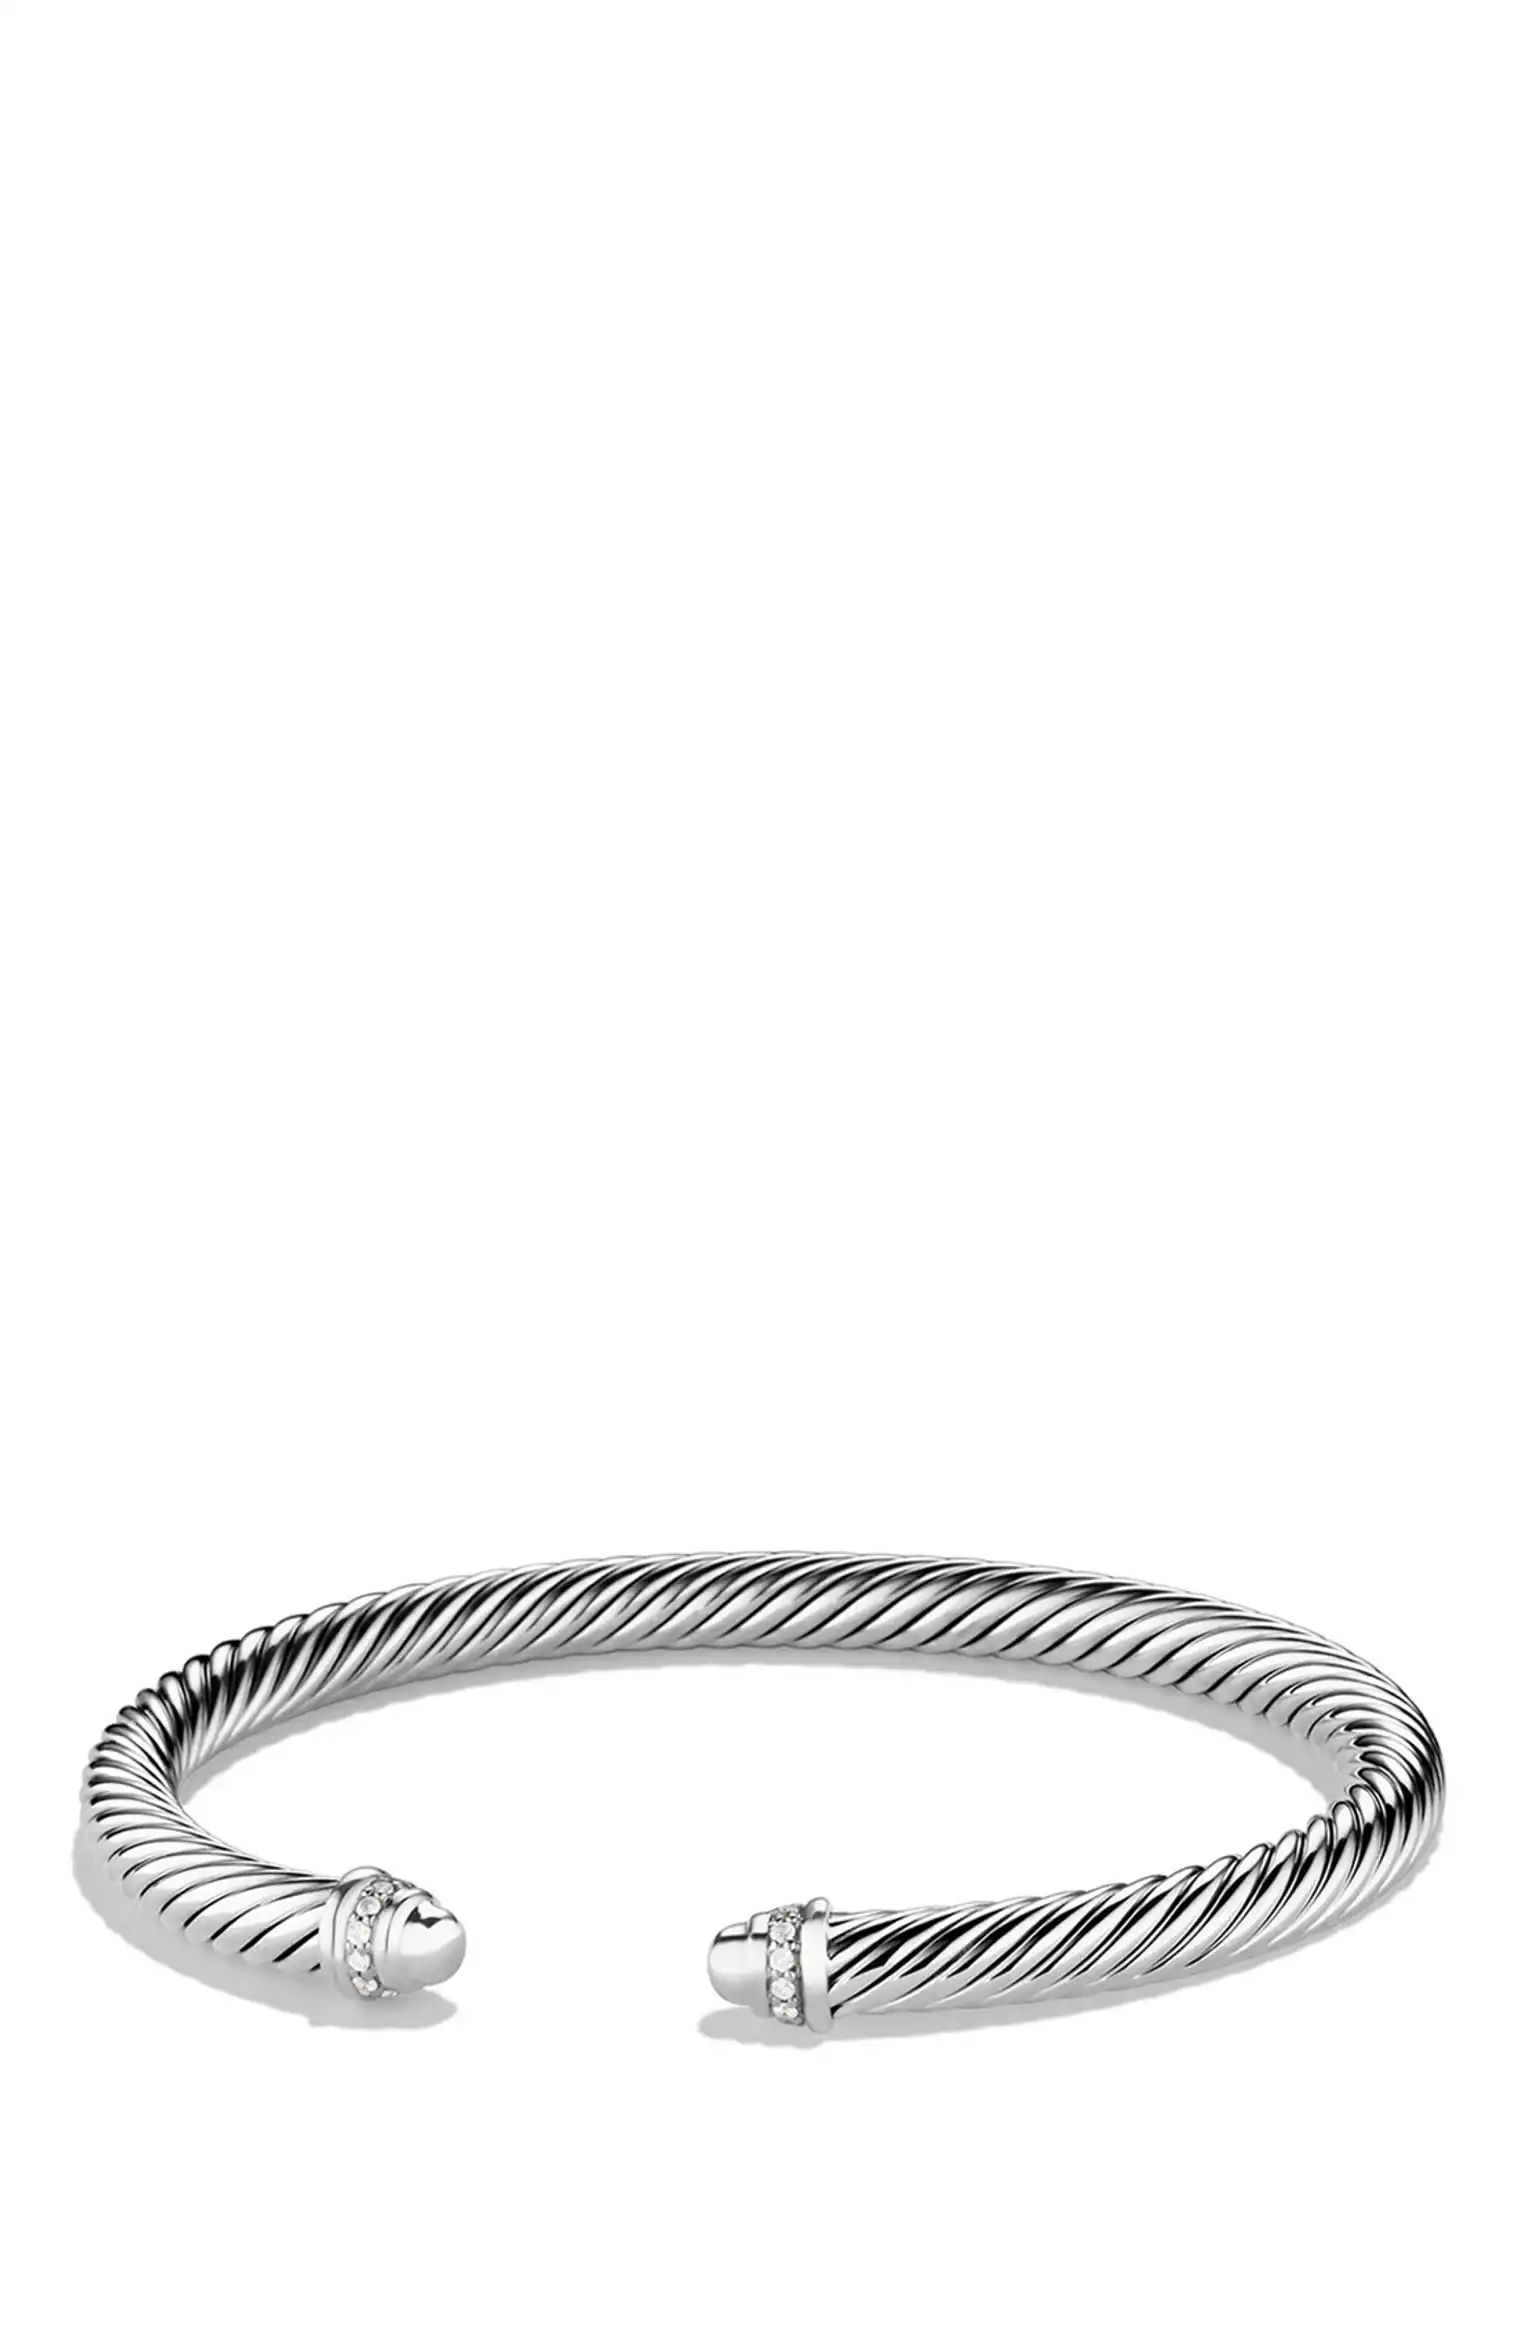 Cable Classics Bracelet with Diamonds, 5mm | Nordstrom